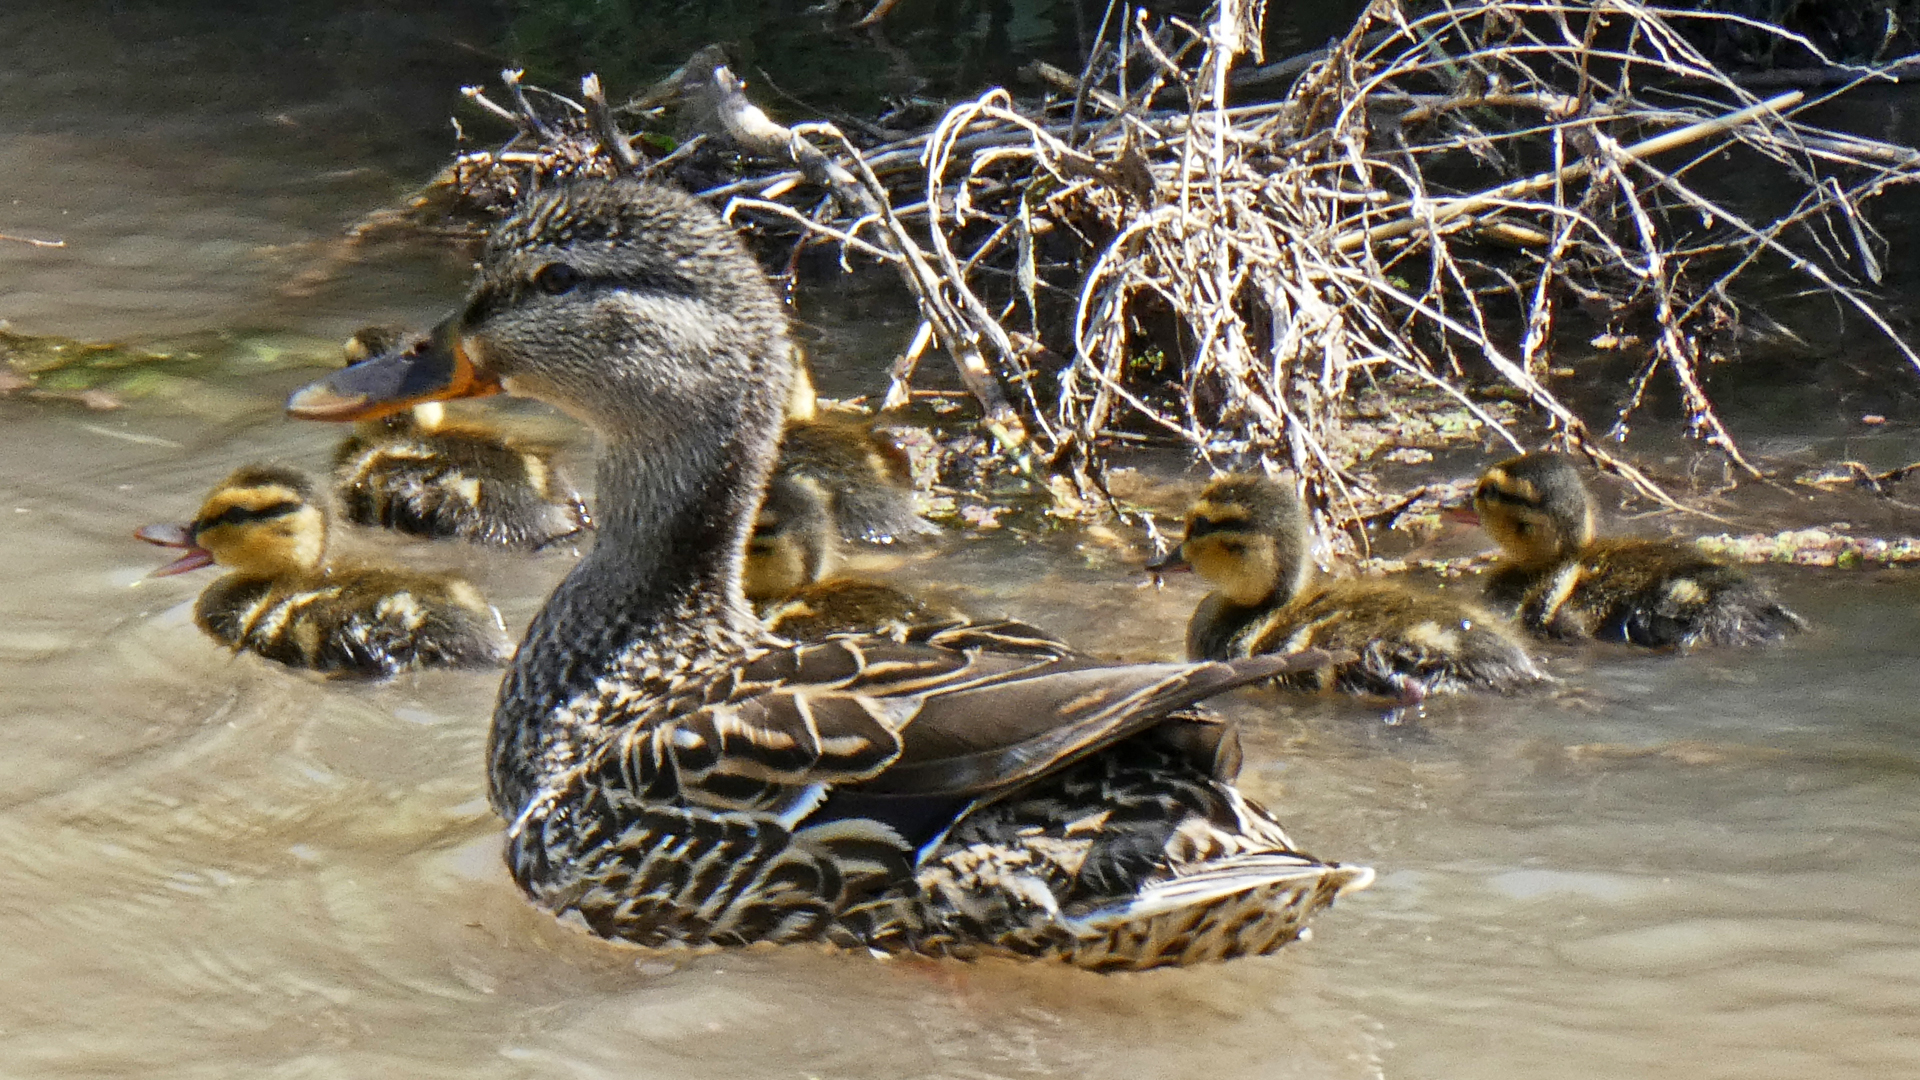 Female with ducklings, Albuquerque, May 2021